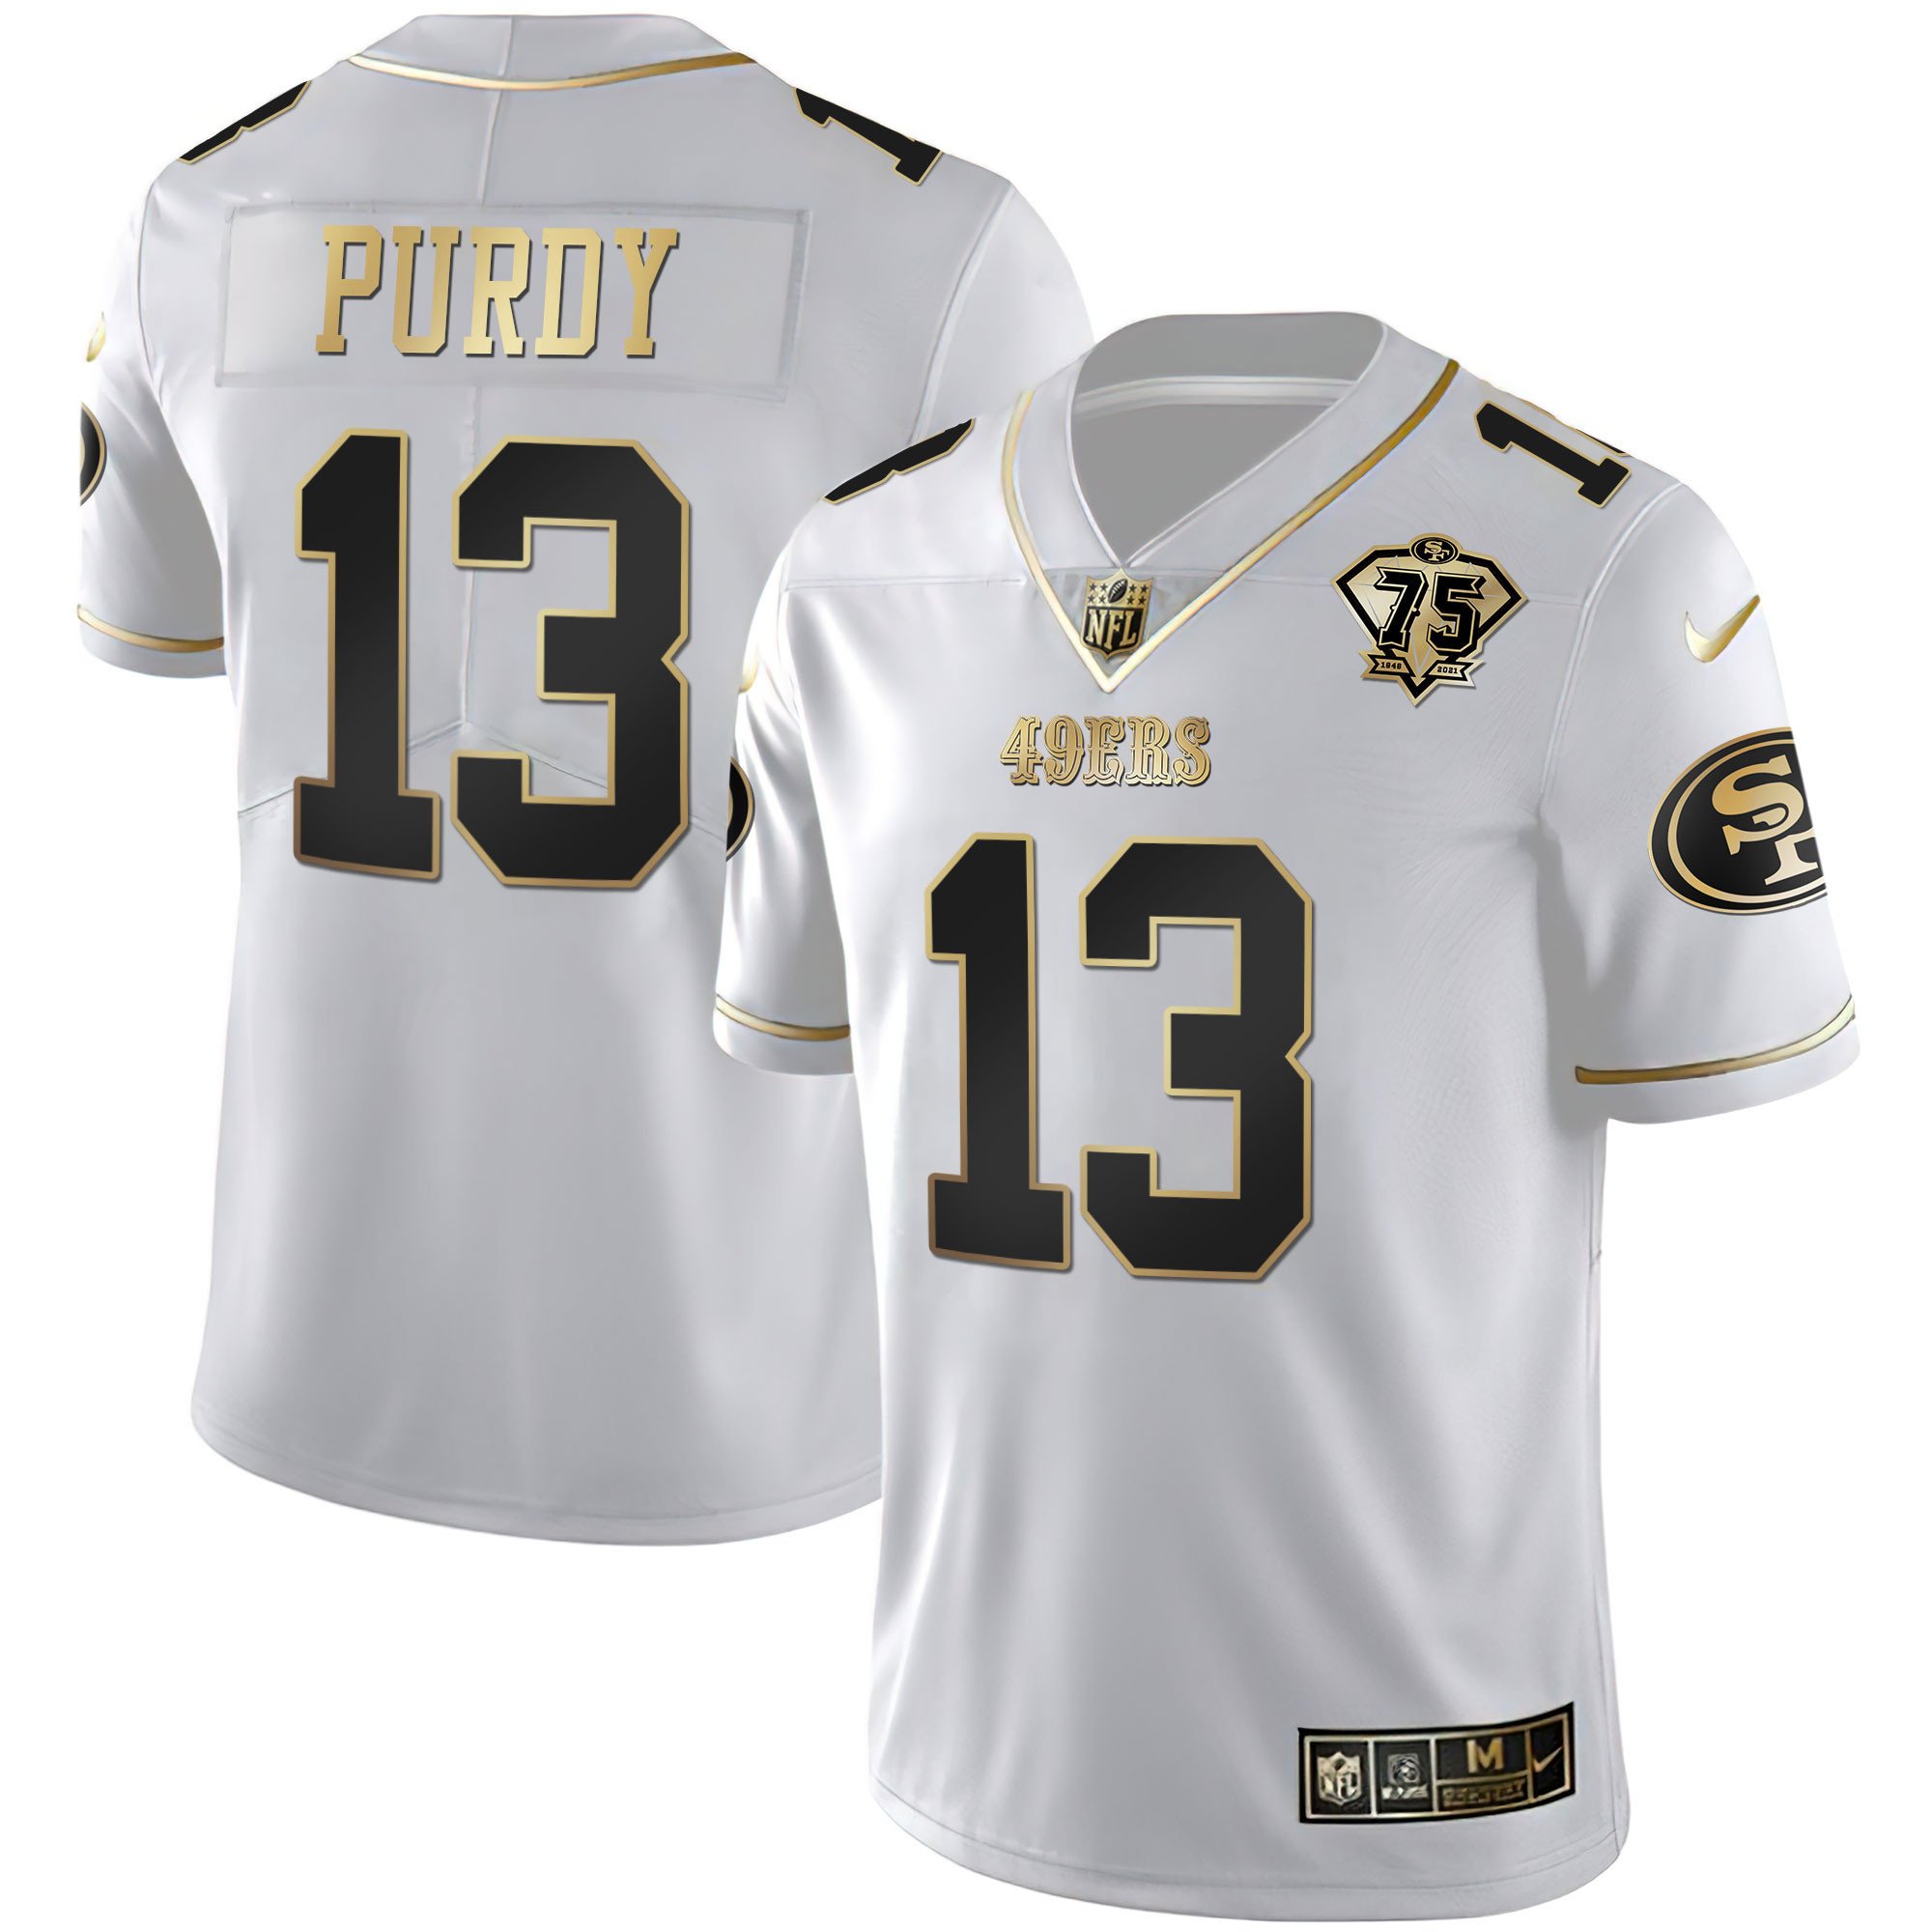 Looking for a Brock Purdy jersey? You may be out of luck